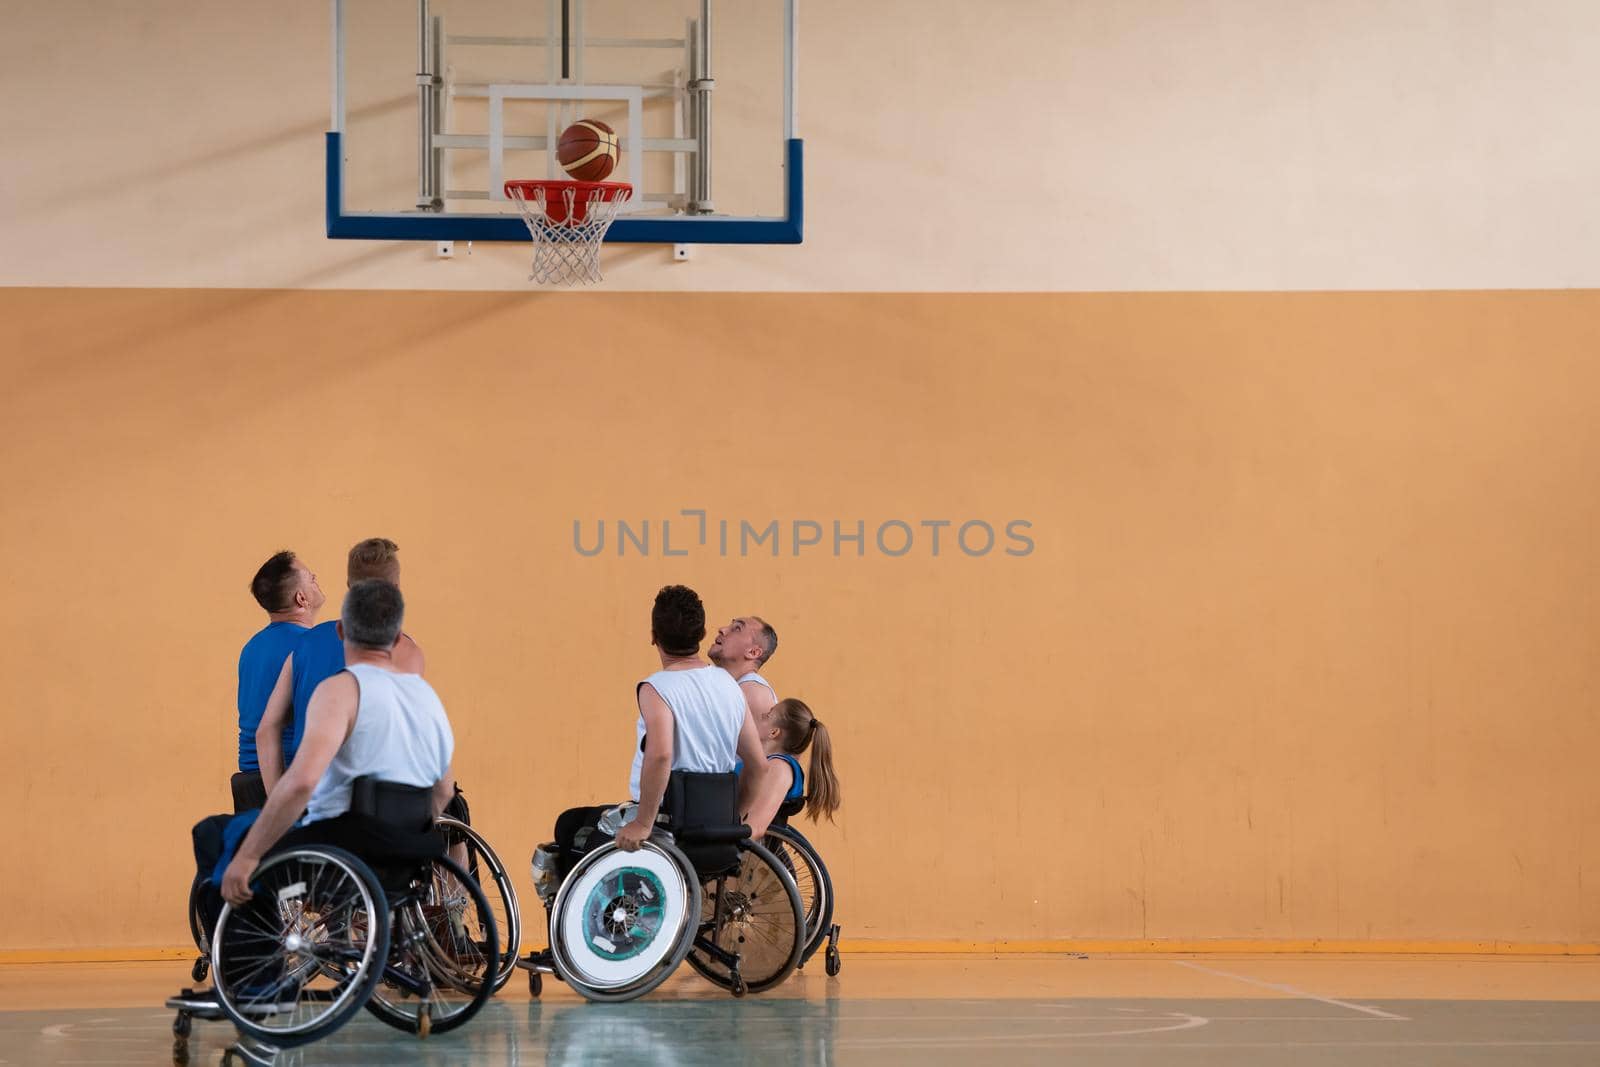 Disabled War veterans mixed race opposing basketball teams in wheelchairs photographed in action while playing an important match in a modern hall.  by dotshock